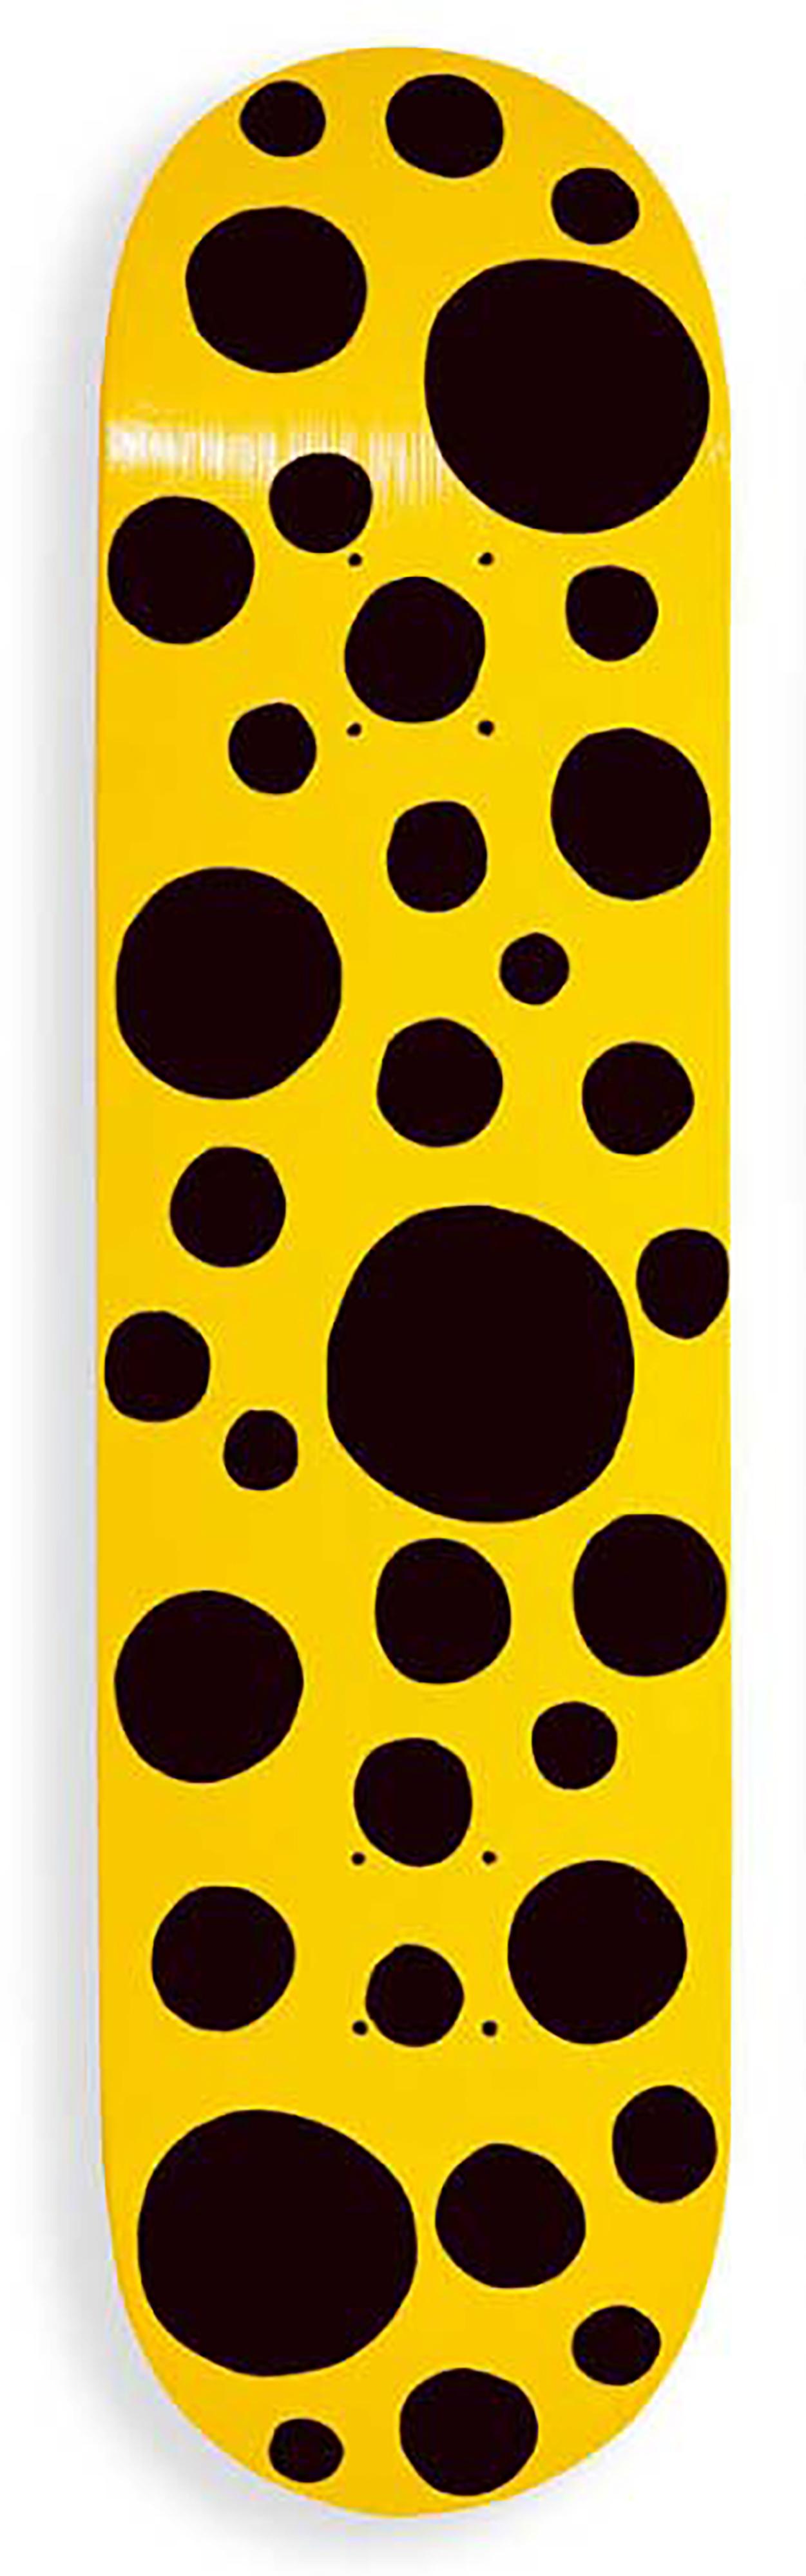 Yayoi Kusama MoMa Skateboard Decks (set of 2 works):
These highly decorative Yayoi Kusama skateboard decks feature Kusama's Dots Obsession imagery and makes for standout Kusama wall art that hangs with ease. Published by MoMa New York. These work